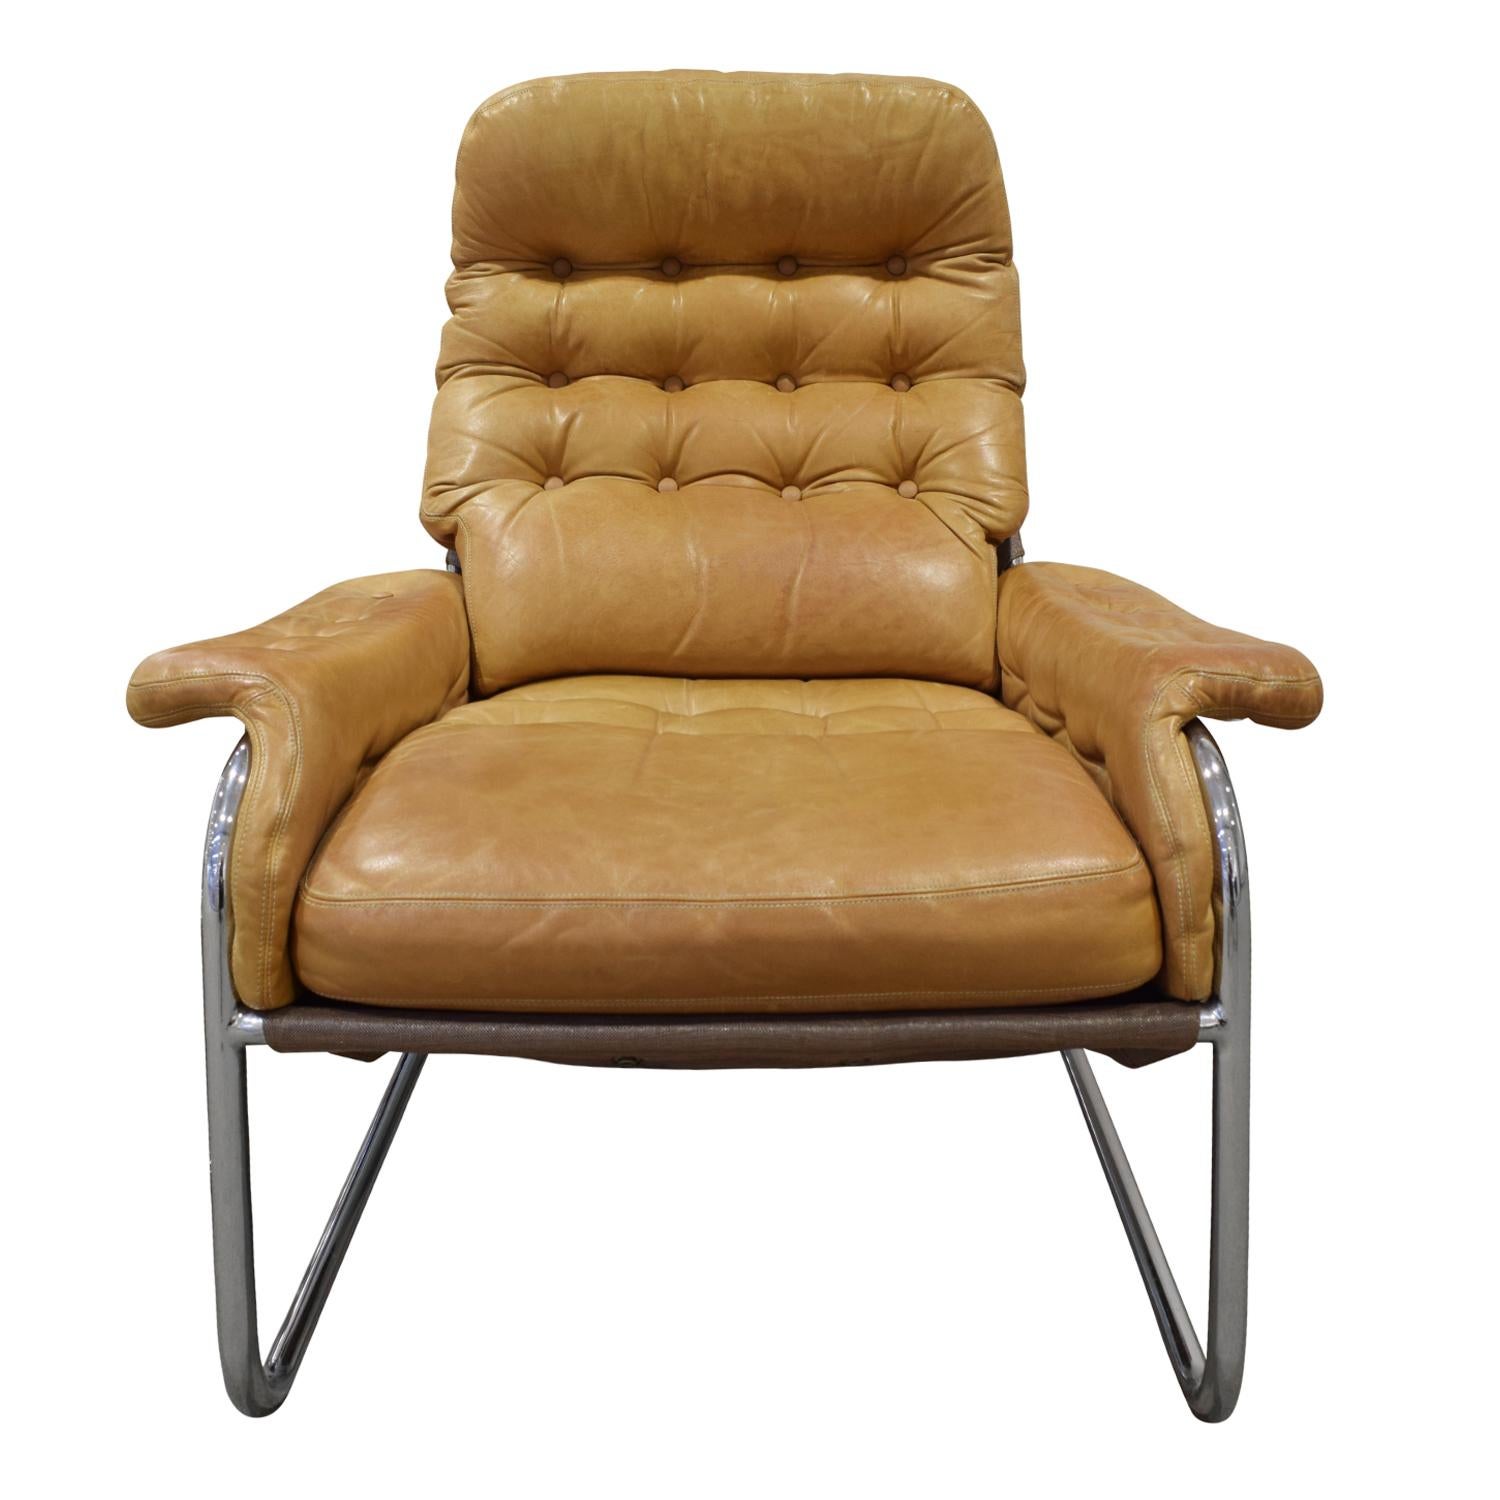 Scandinavian Modern DUX Chair and Ottoman in Polished Chrome and Leather Upholstery, 1980s